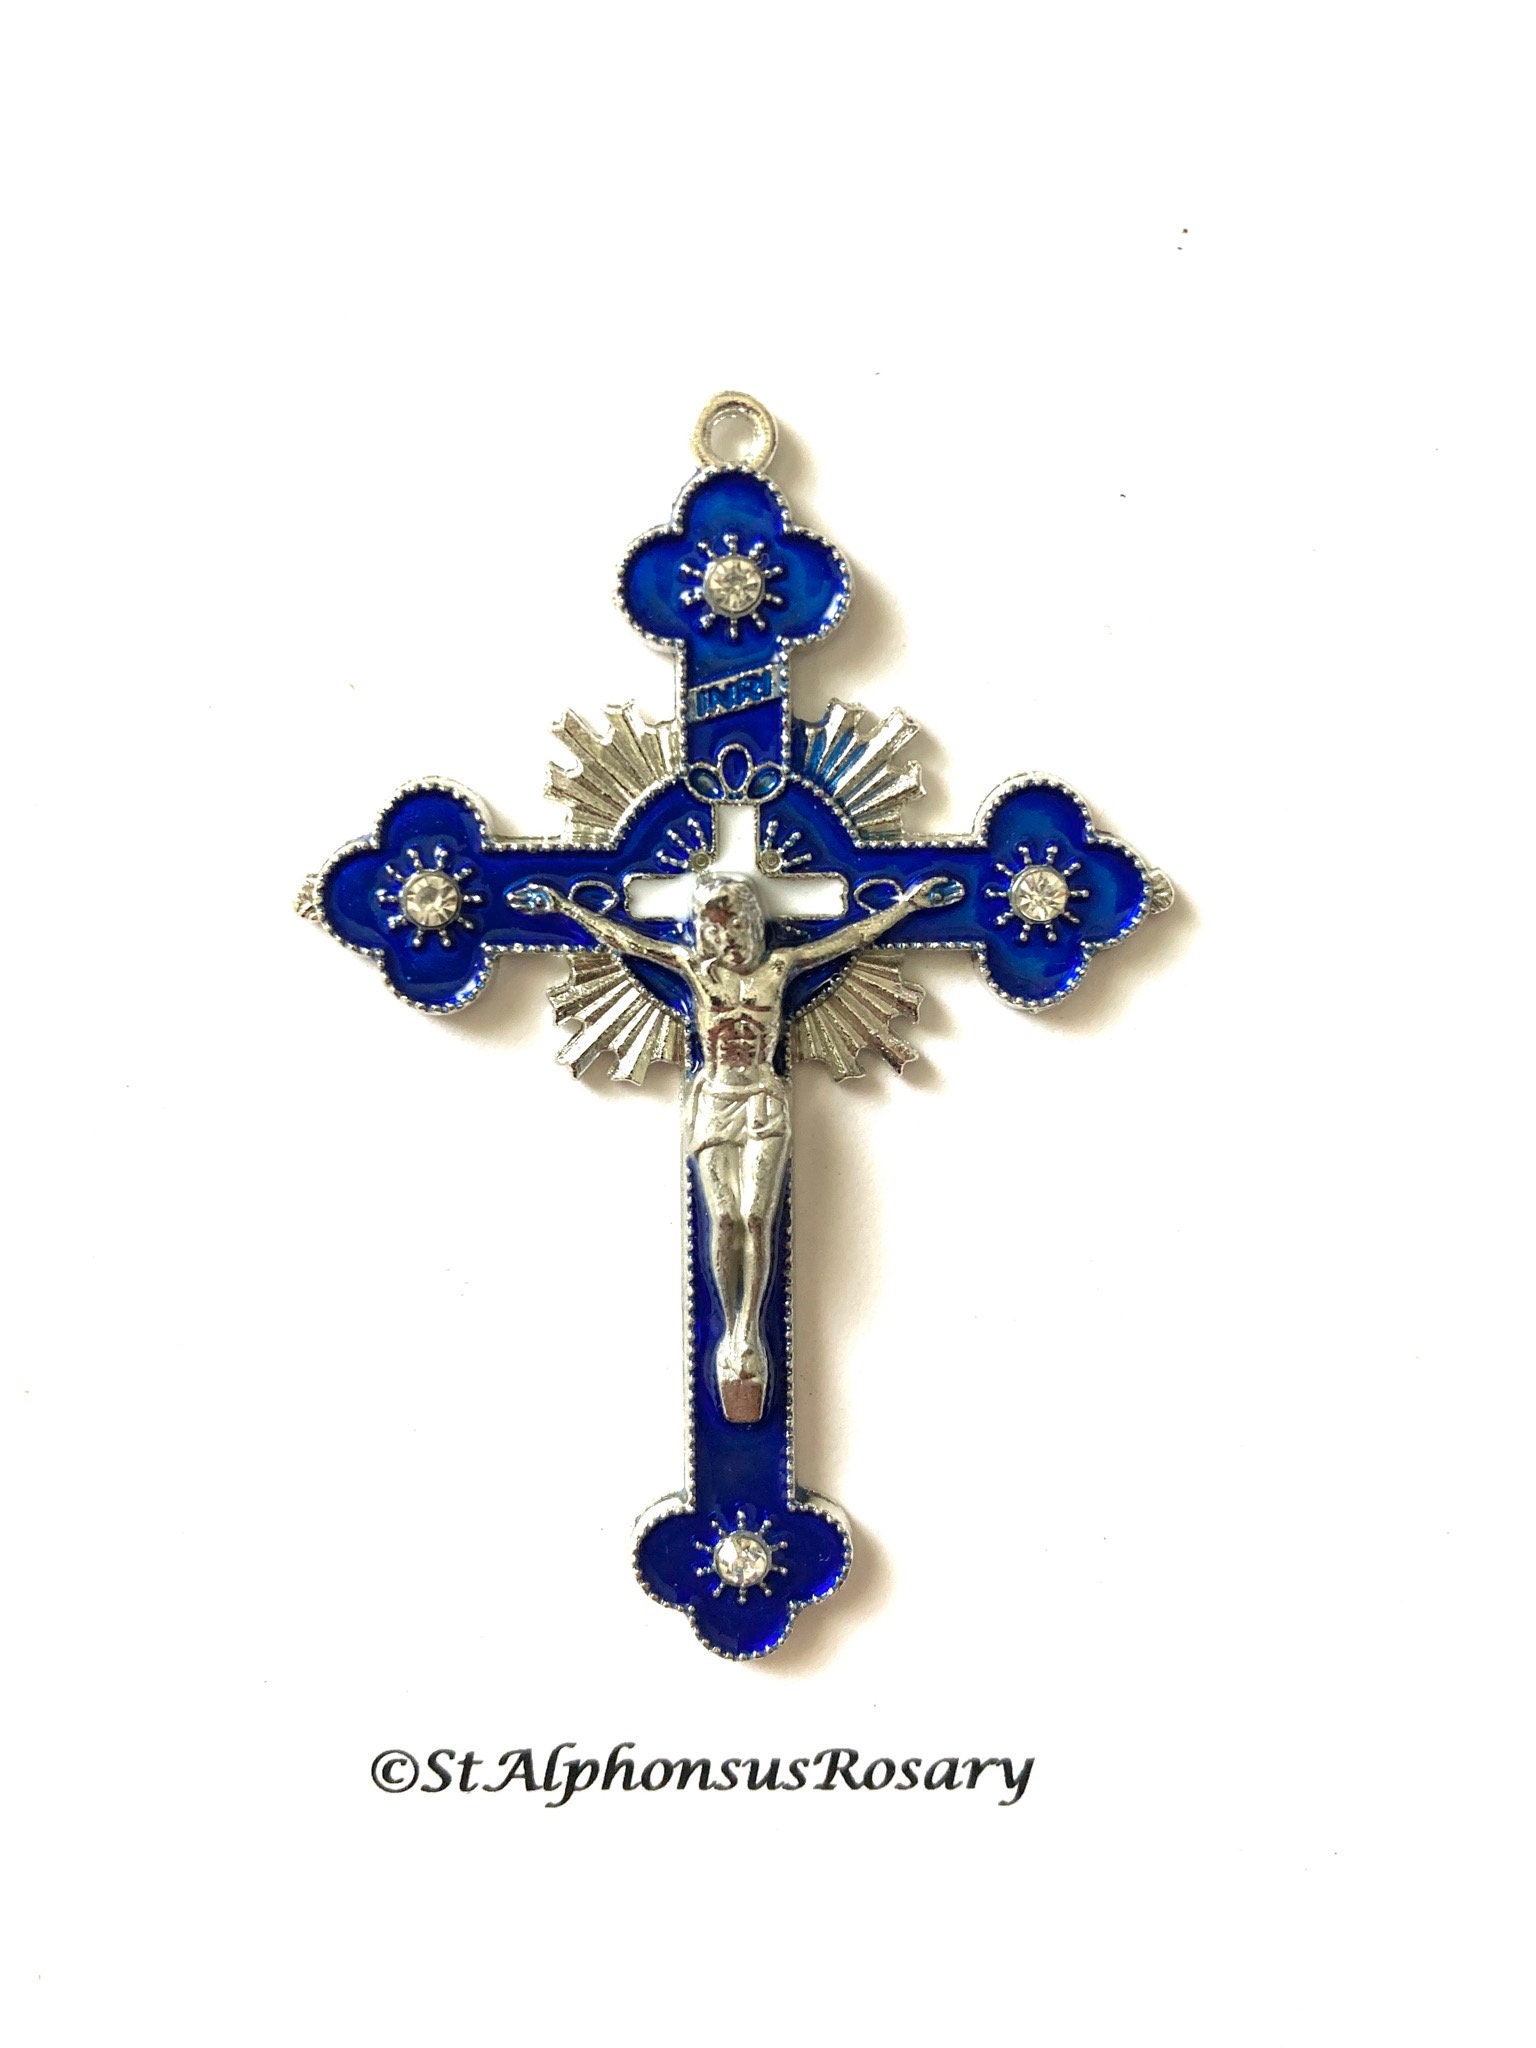 White Enamel Rhinestone Deluxe Rosary Crucifix or Pendant Large Rosary  Making Crucifix 2 Inches Rosary Parts Rosary Supplies 